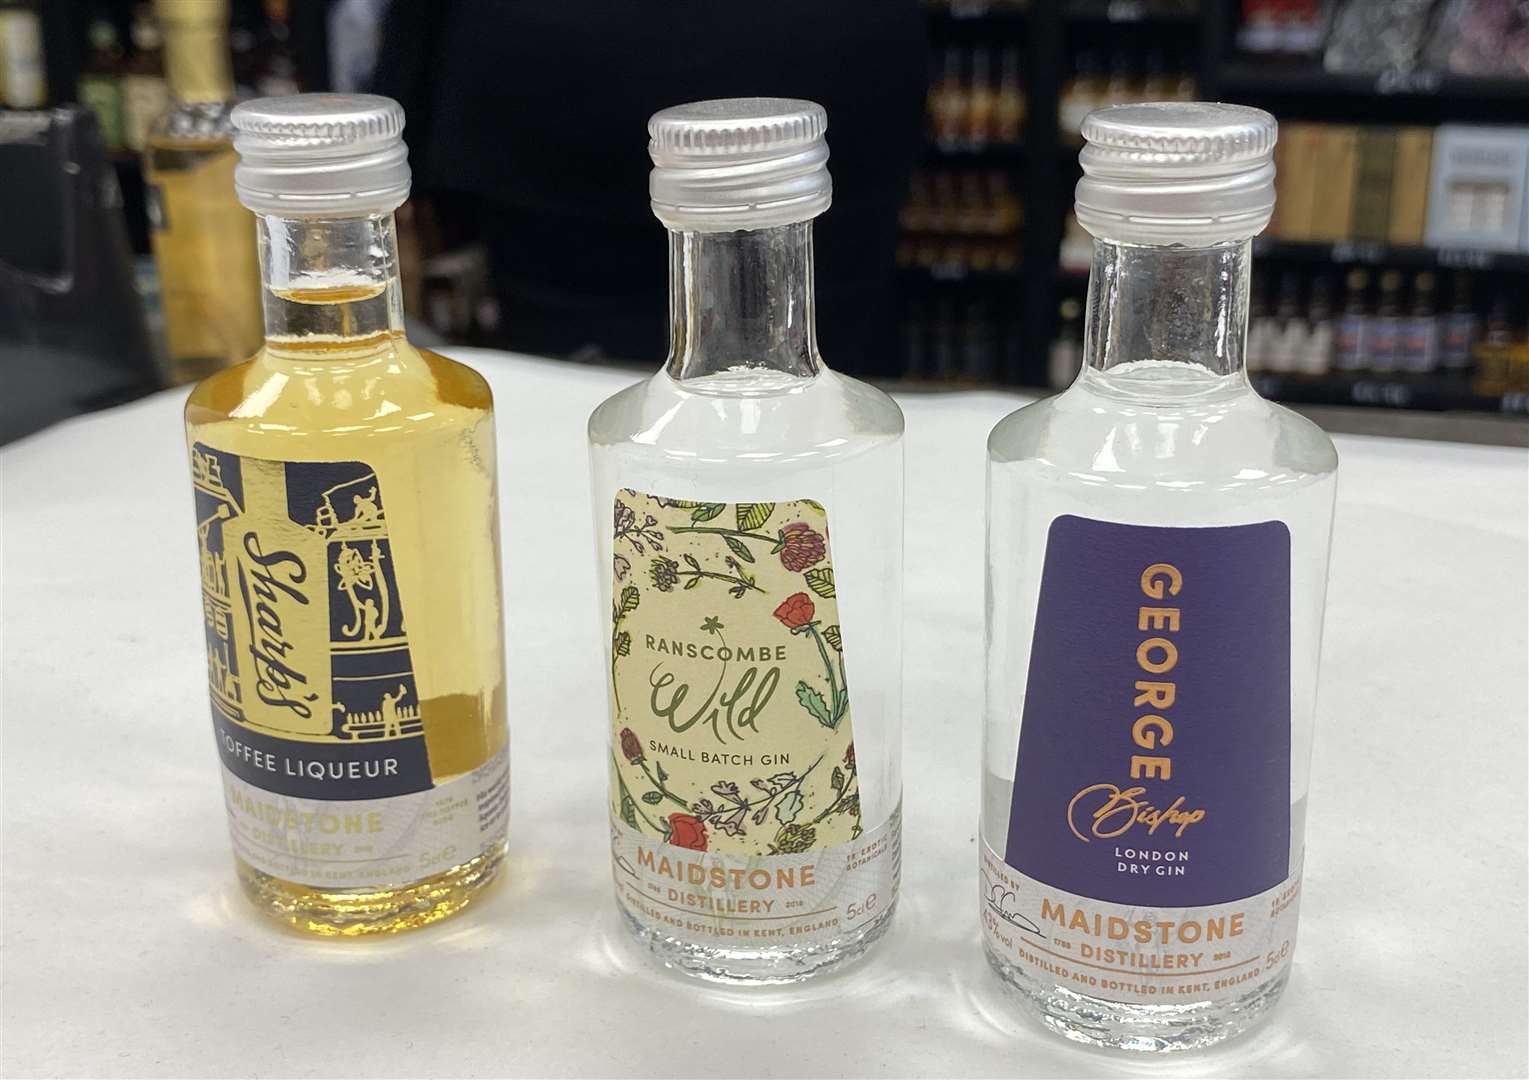 The family sells gin from Maidstone's own distillery